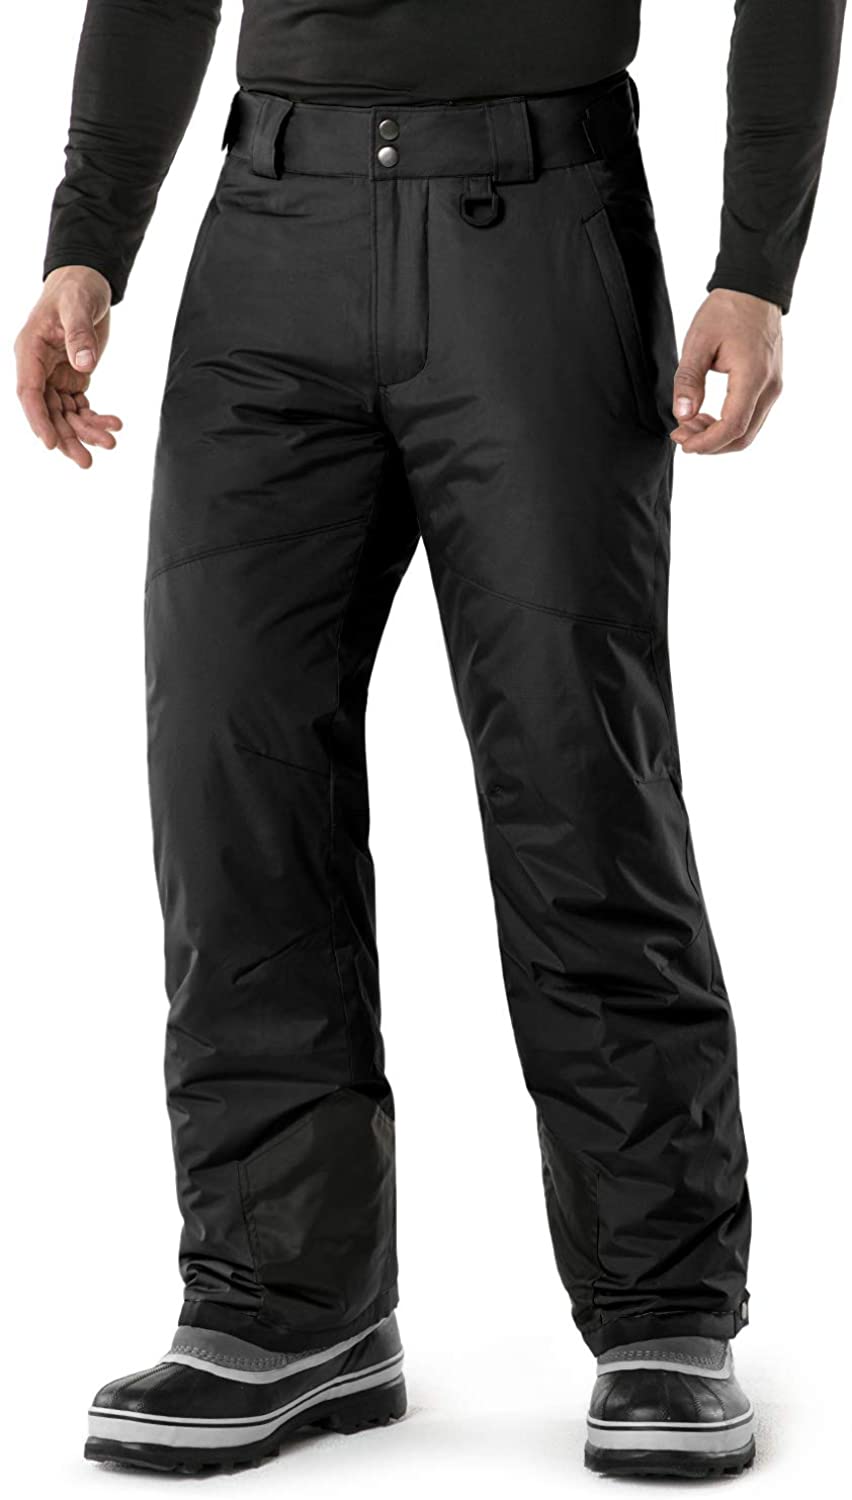 TSLA Mens Rip-Stop Snow Pants Windproof Ski Insulated Water-Repel Bottoms